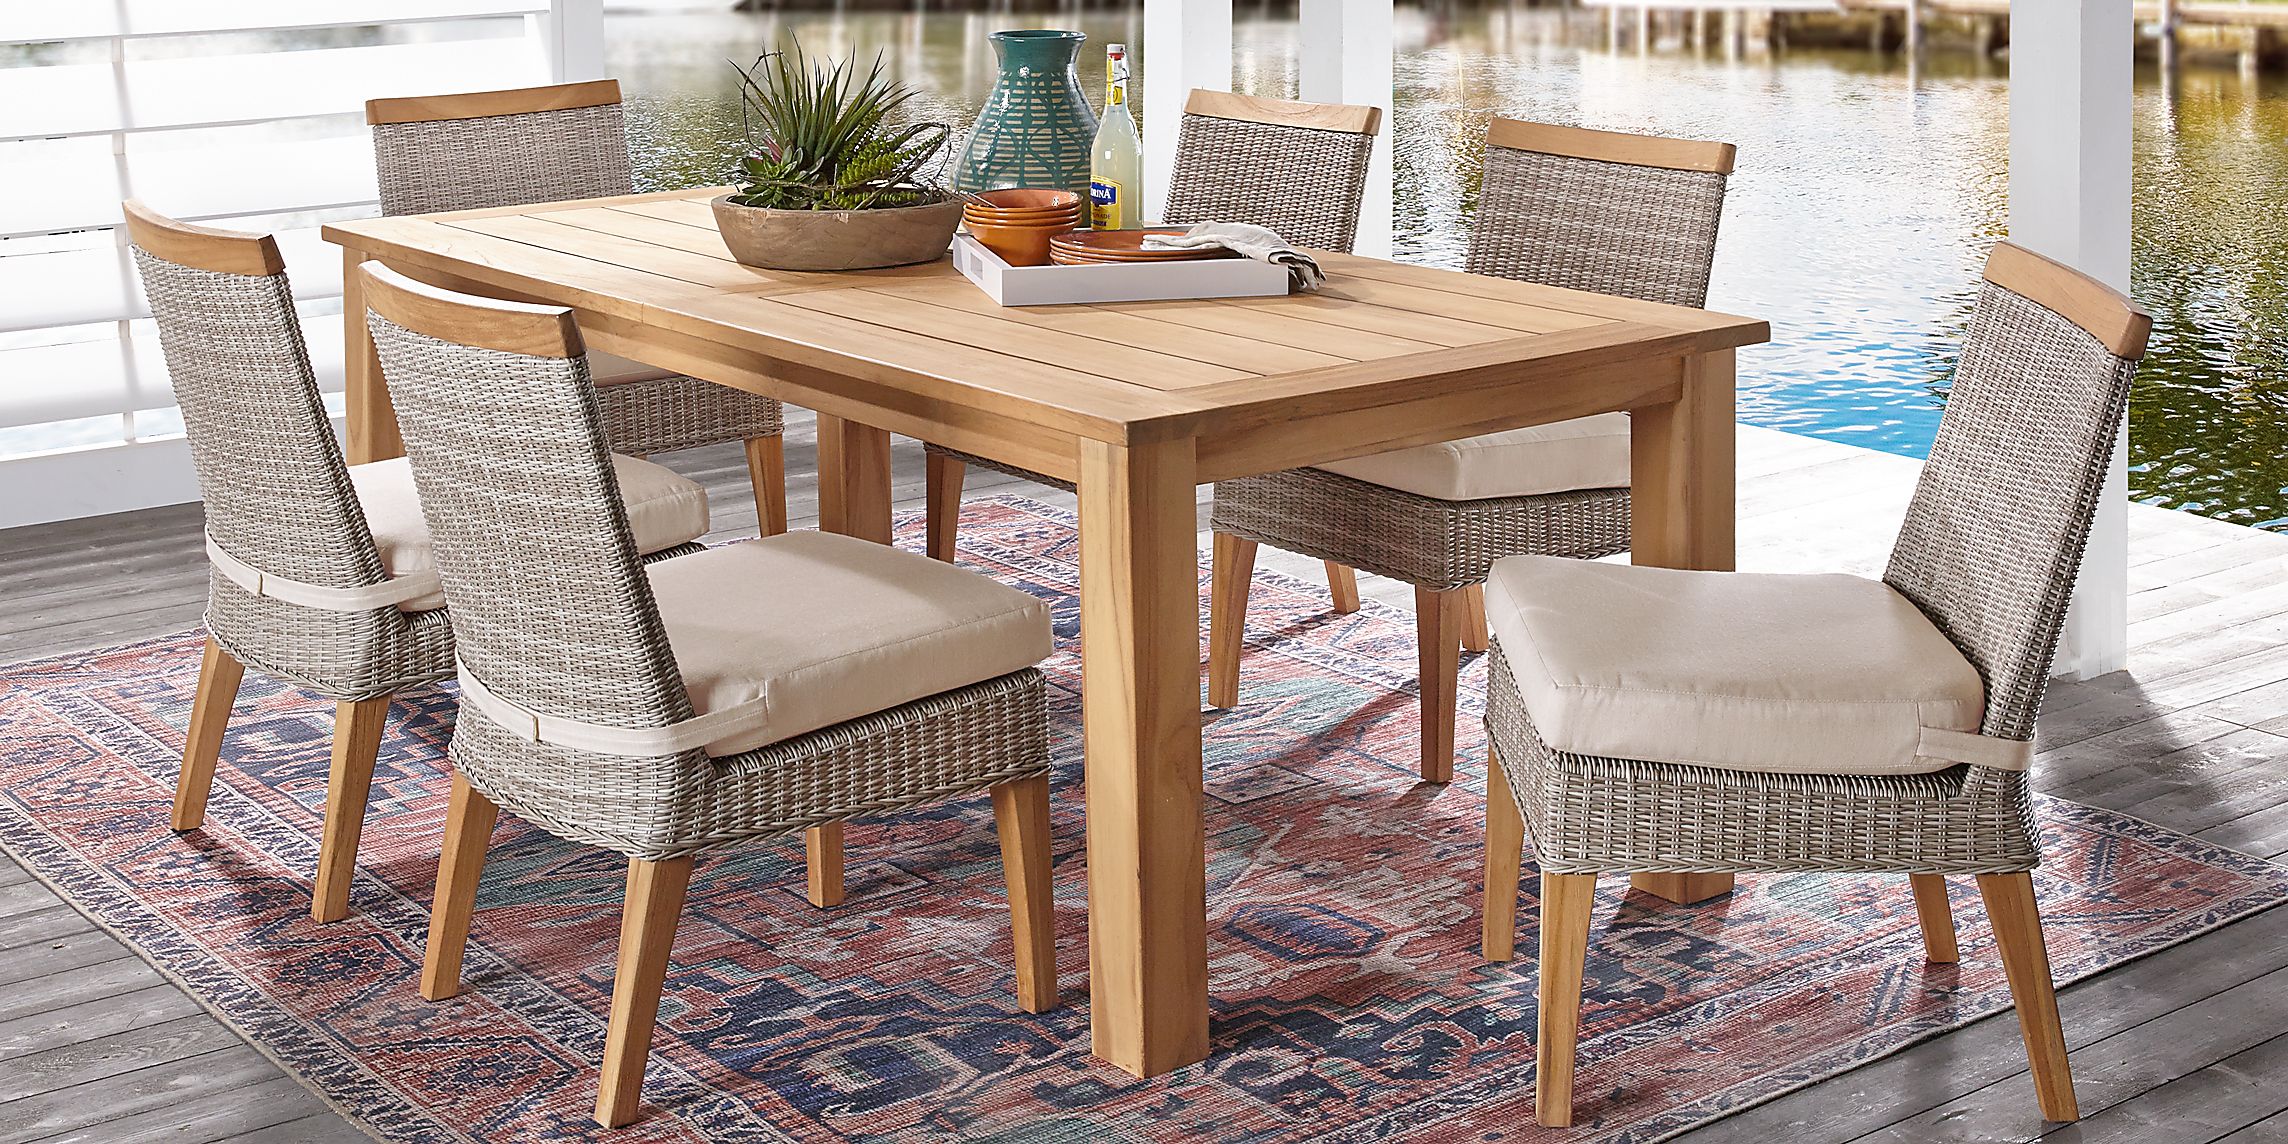 Hamptons Cove Teak 7 Pc Rectangle Outdoor Dining Set with Flax Cushions